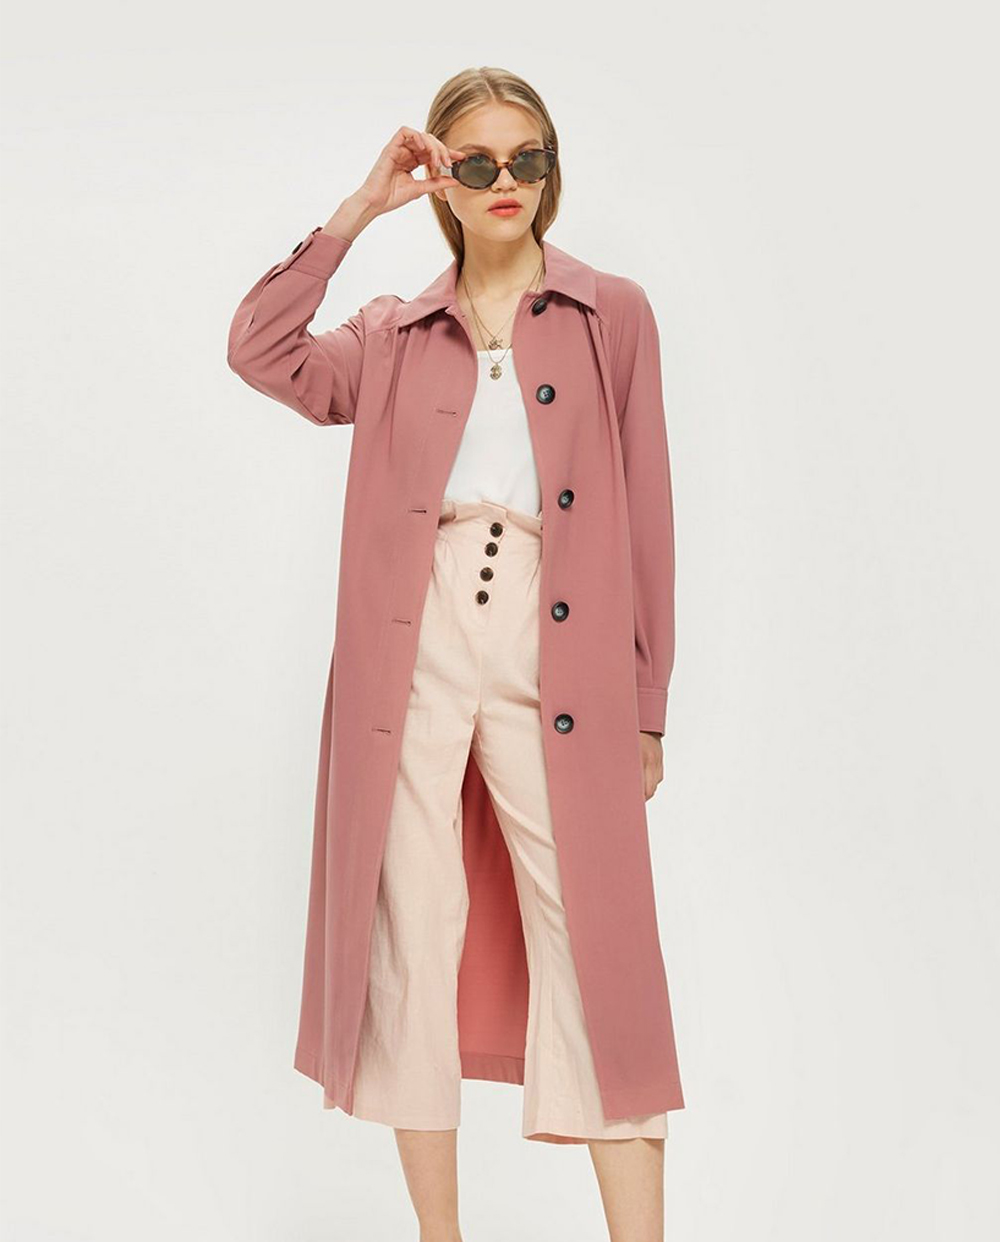 30+ Items We Can't Believe Are On Sale Right Now And We're #AddingToCart | Blouson Duster Coat, £40 ( was £69) from Topshop